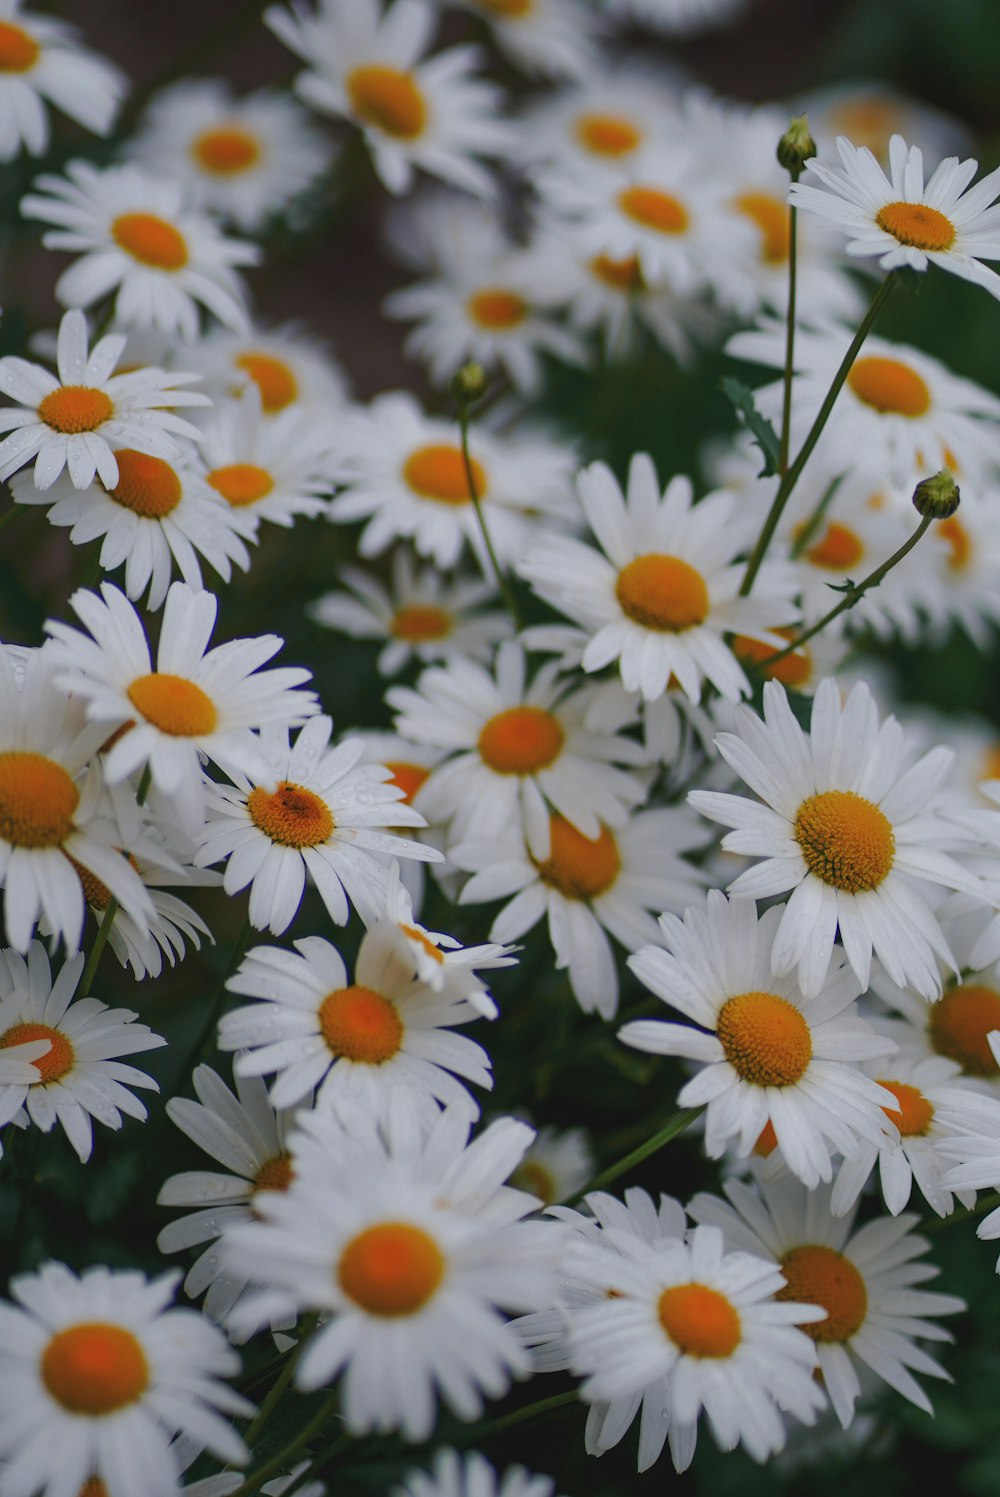 a bunch of white flowers with orange centers